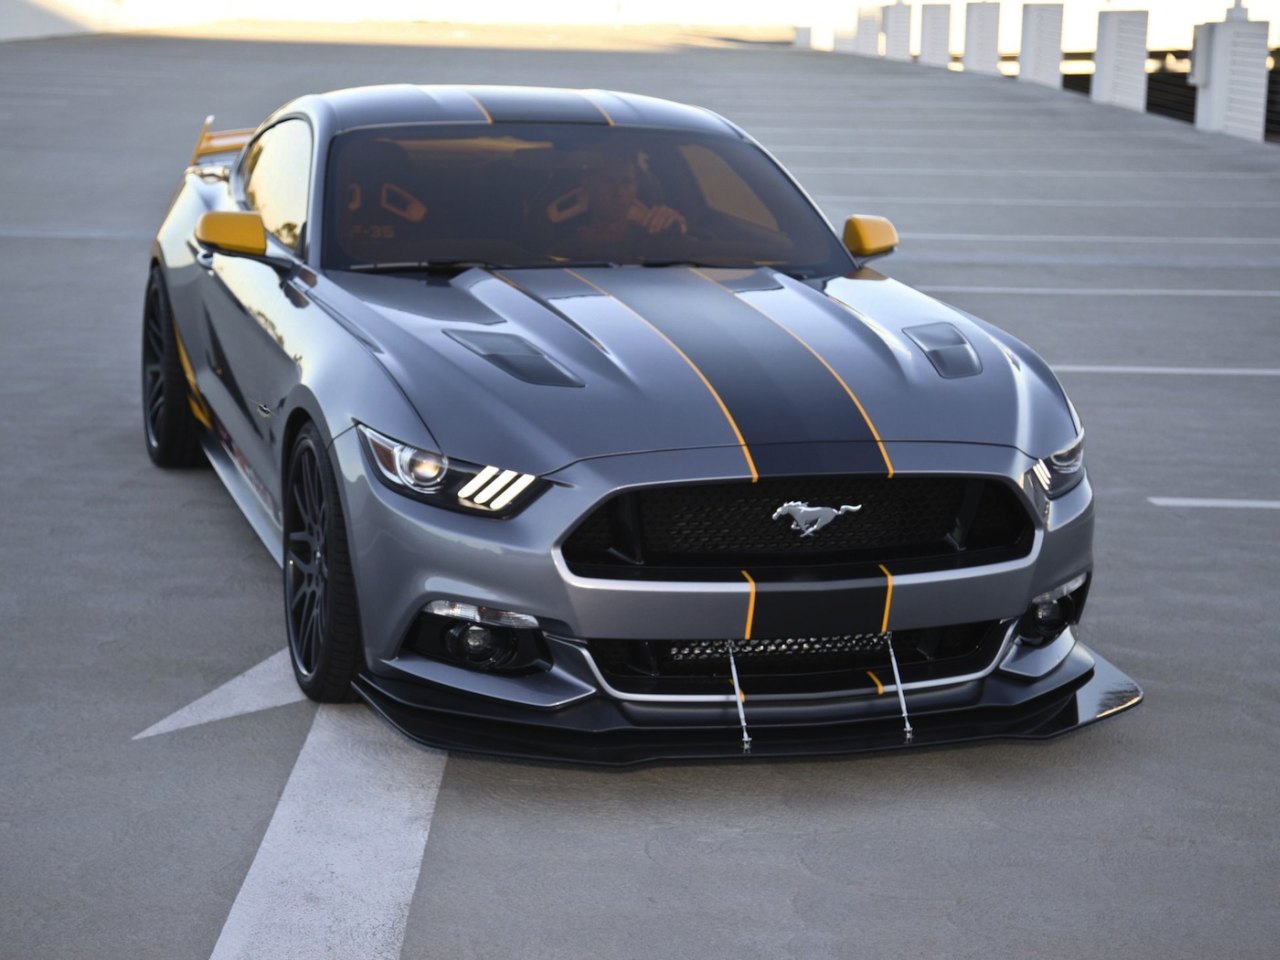 Ford Mustang F-35 Lightning II Edition: one-off voor goede doel